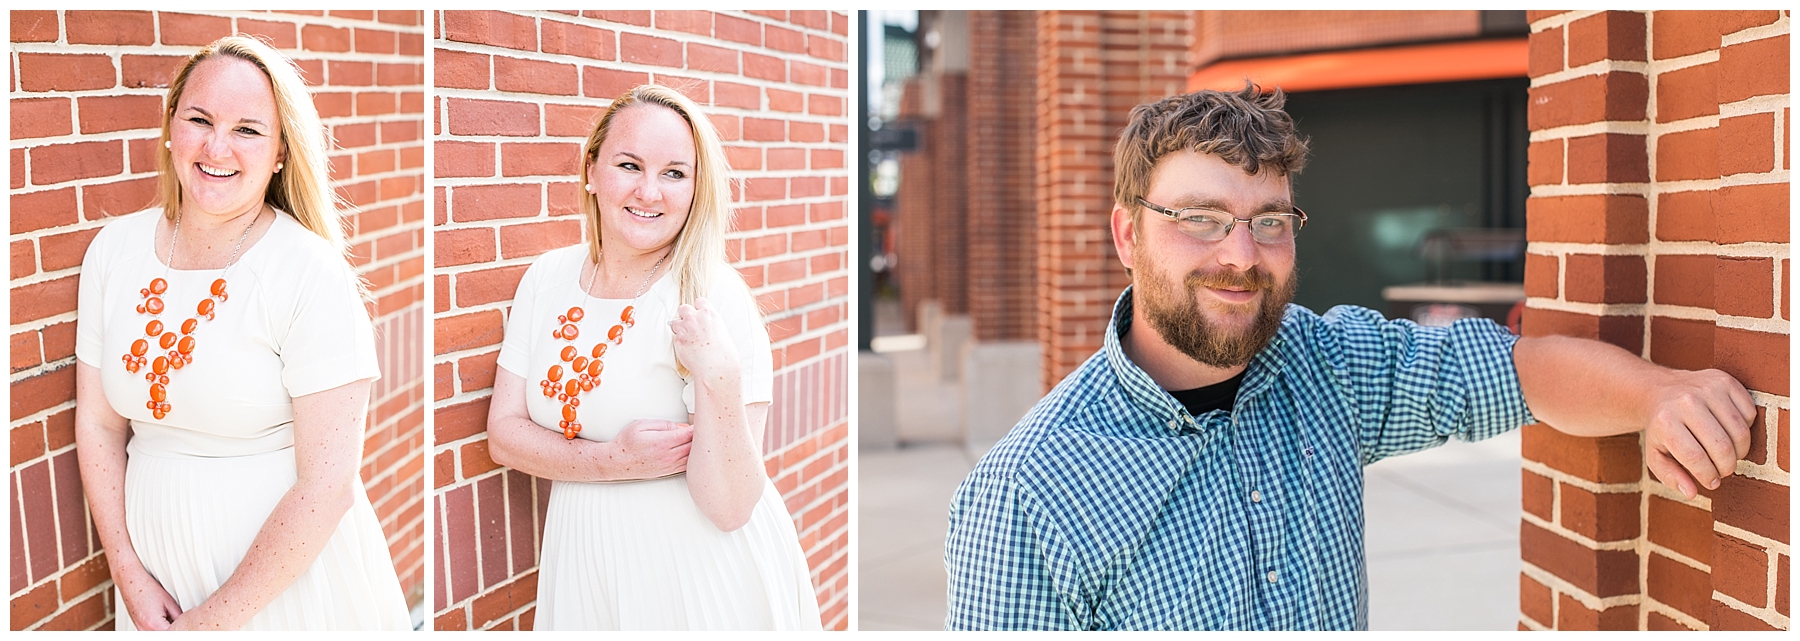 Tess Ray Camden Yards Engagement Session Living Radiant Photography photos_0032.jpg